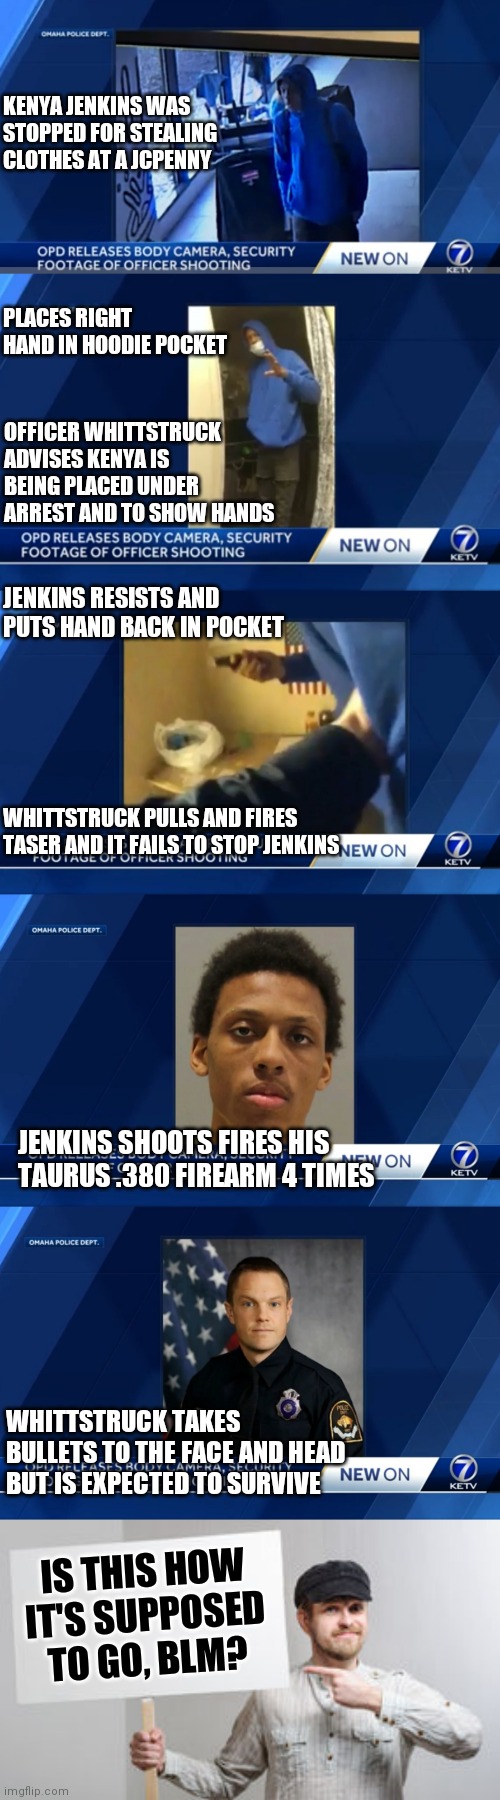 I can't believe the officer didn't draw his firearm when his hand went in his hoodie | KENYA JENKINS WAS STOPPED FOR STEALING CLOTHES AT A JCPENNY; PLACES RIGHT HAND IN HOODIE POCKET; OFFICER WHITTSTRUCK ADVISES KENYA IS BEING PLACED UNDER ARREST AND TO SHOW HANDS; JENKINS RESISTS AND PUTS HAND BACK IN POCKET; WHITTSTRUCK PULLS AND FIRES TASER AND IT FAILS TO STOP JENKINS; JENKINS SHOOTS FIRES HIS TAURUS .380 FIREARM 4 TIMES; WHITTSTRUCK TAKES BULLETS TO THE FACE AND HEAD BUT IS EXPECTED TO SURVIVE; IS THIS HOW
IT'S SUPPOSED TO GO, BLM? | image tagged in protest sign meme,blm,police,liberal logic | made w/ Imgflip meme maker